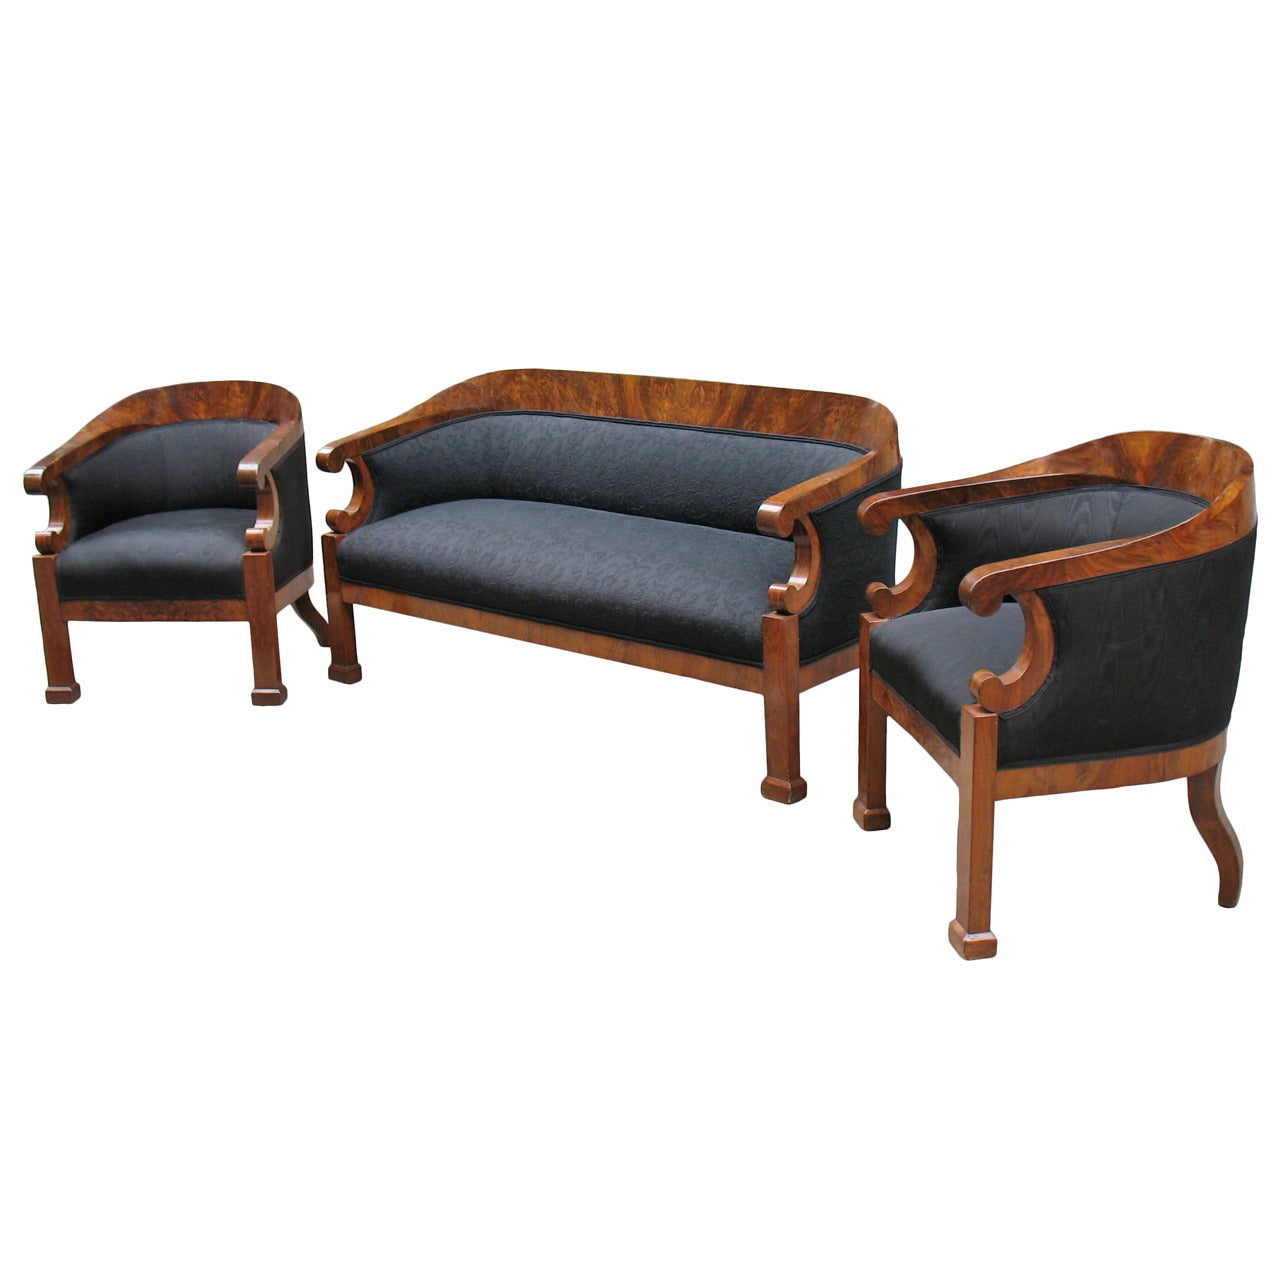 Original Viennese Biedermeier Suite from the 1820's (Sofa and 2 Bergeres) For Sale